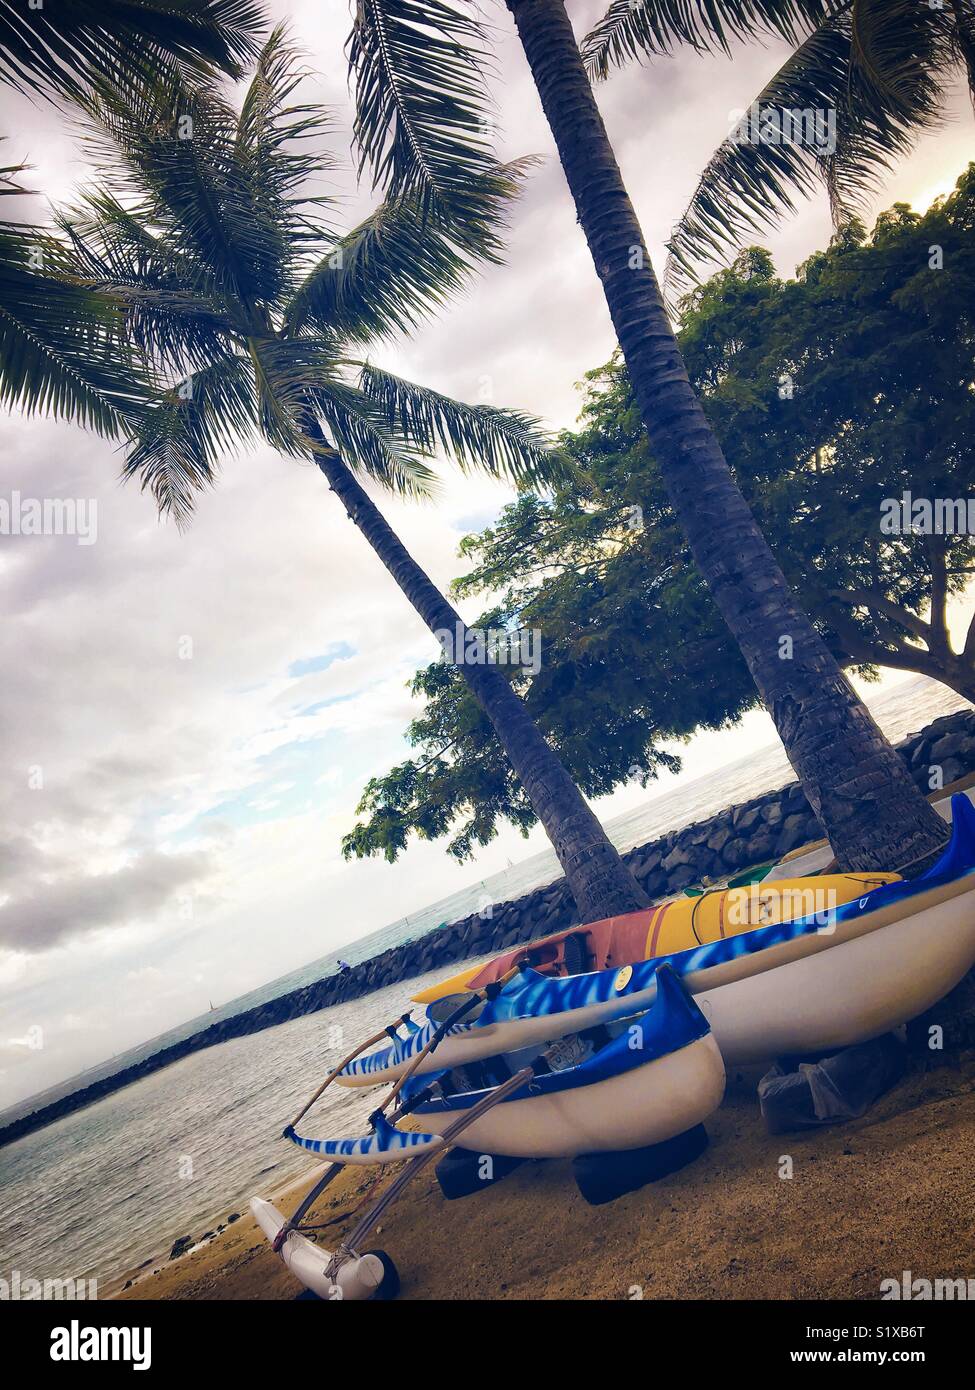 Outrigger canoes on a beach next to palm trees. Stock Photo